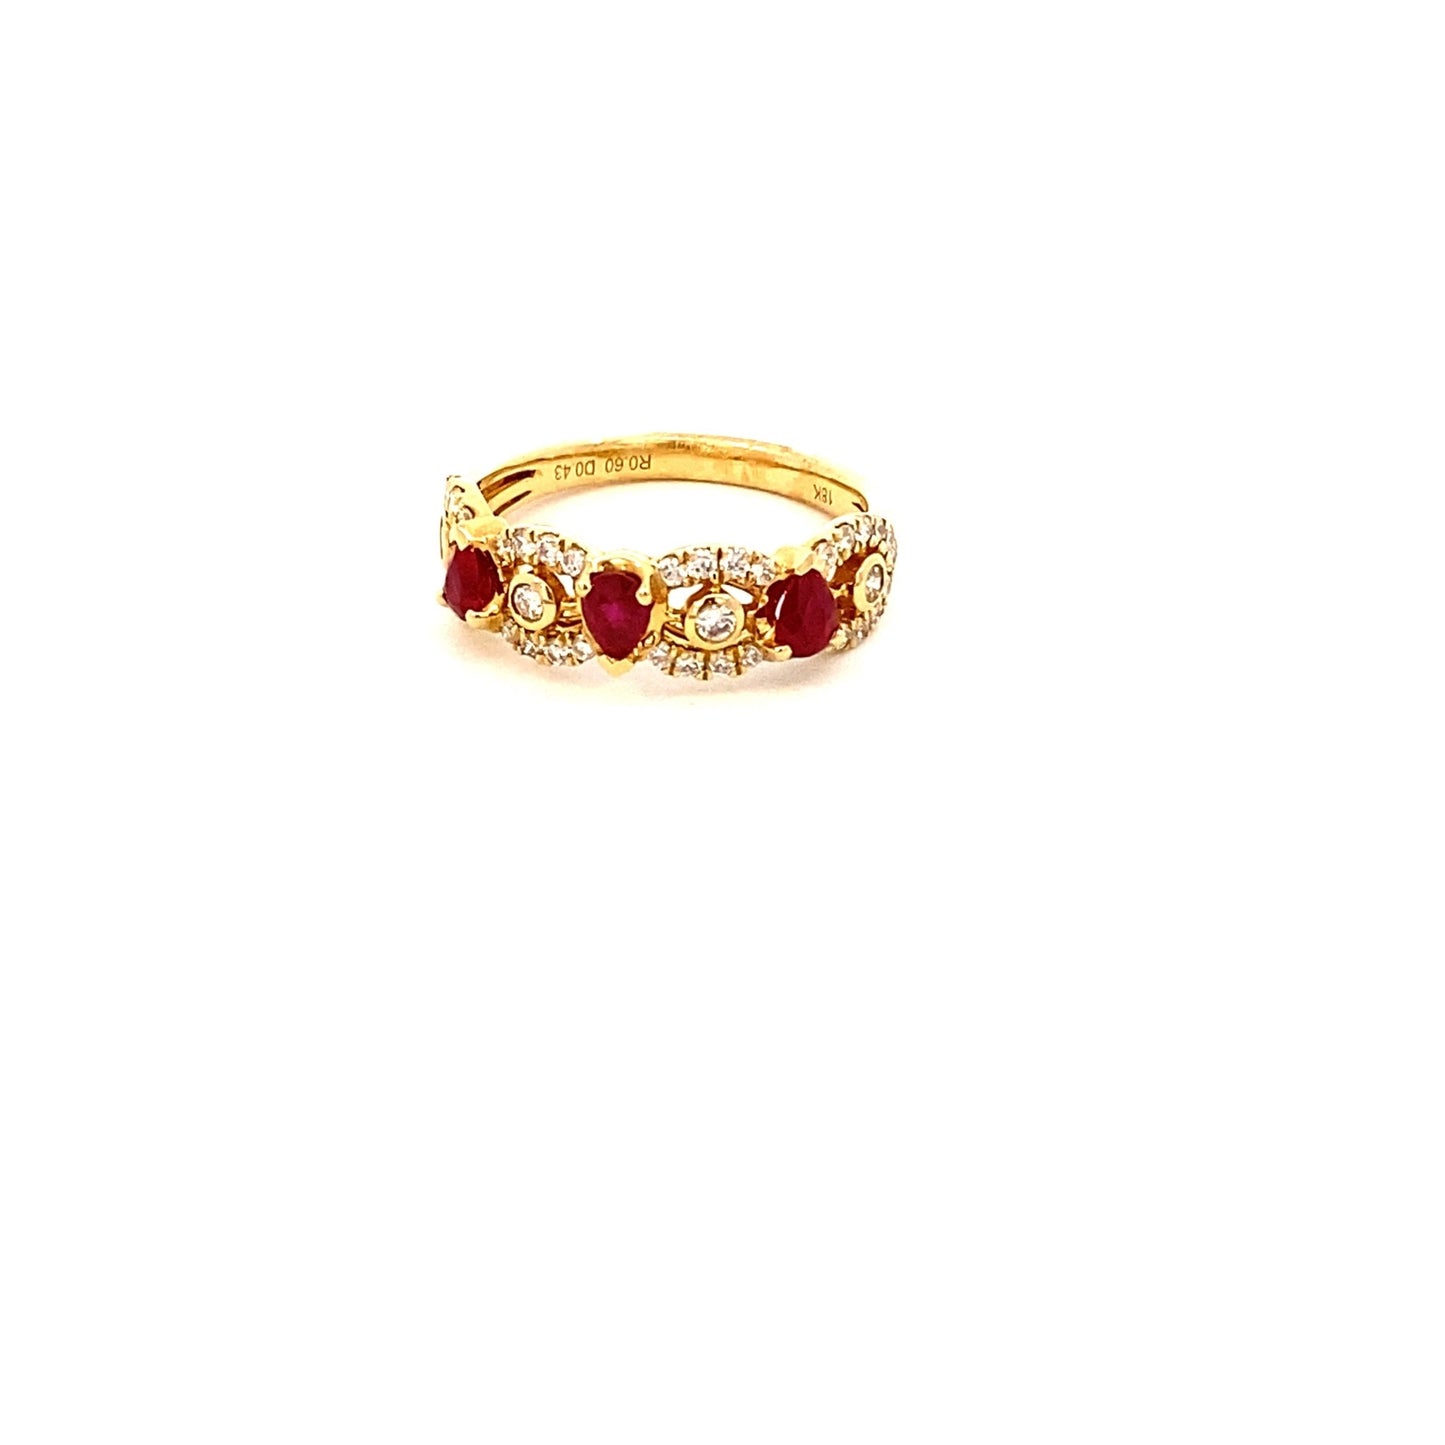 Ring- 18k Yellow Gold with 3 oval rubies and diamond segments - Gaines Jewelers